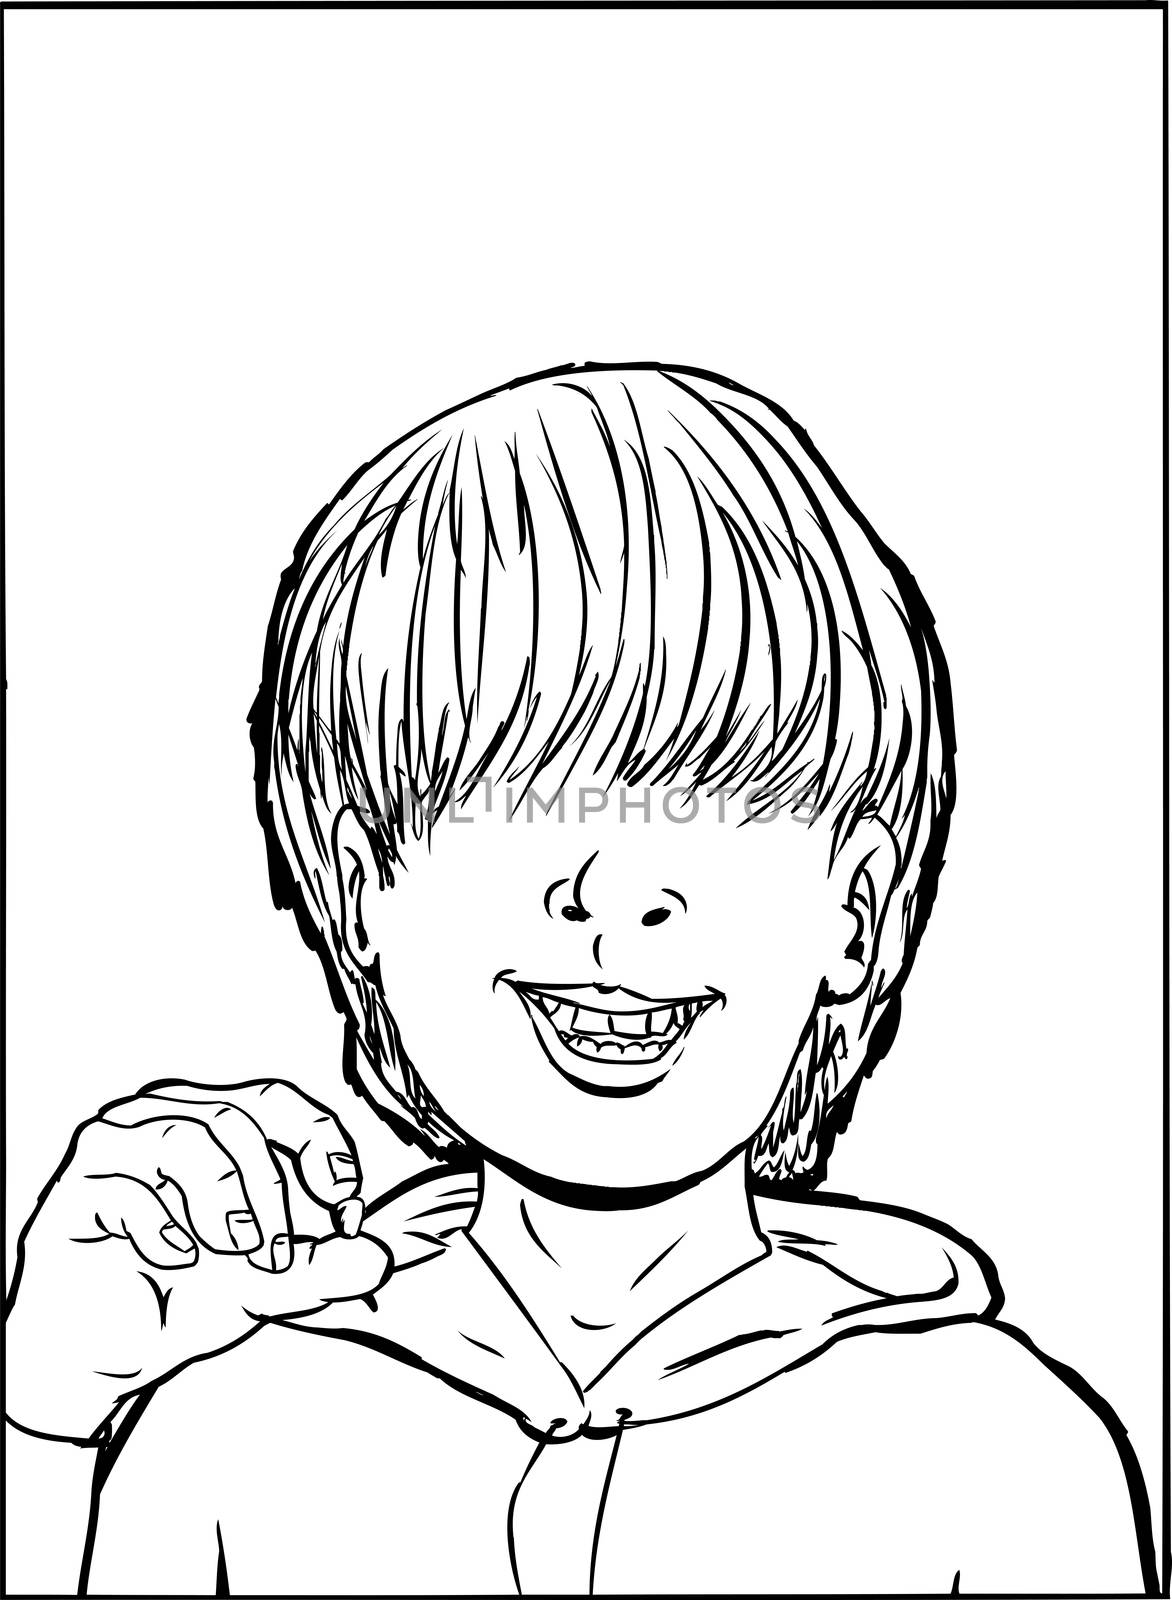 Outline of Boy Holding Tooth by TheBlackRhino